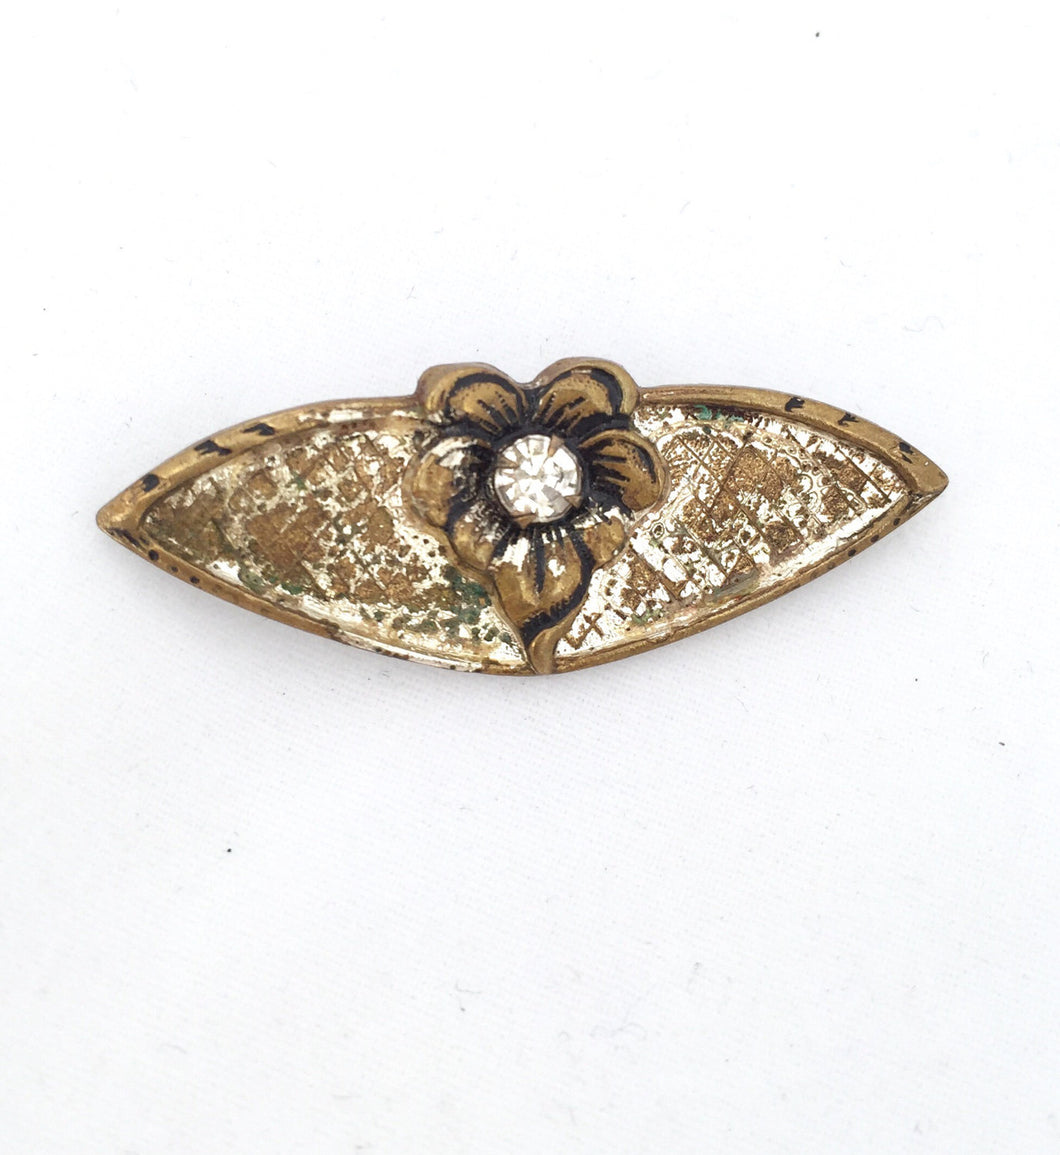 Art Nouveau Flower Brooch Small Pin Prong Set Rhinestone Brooch in  Brass with Crosshatched Texture and Silver Leaf, Early 20th Century Pin